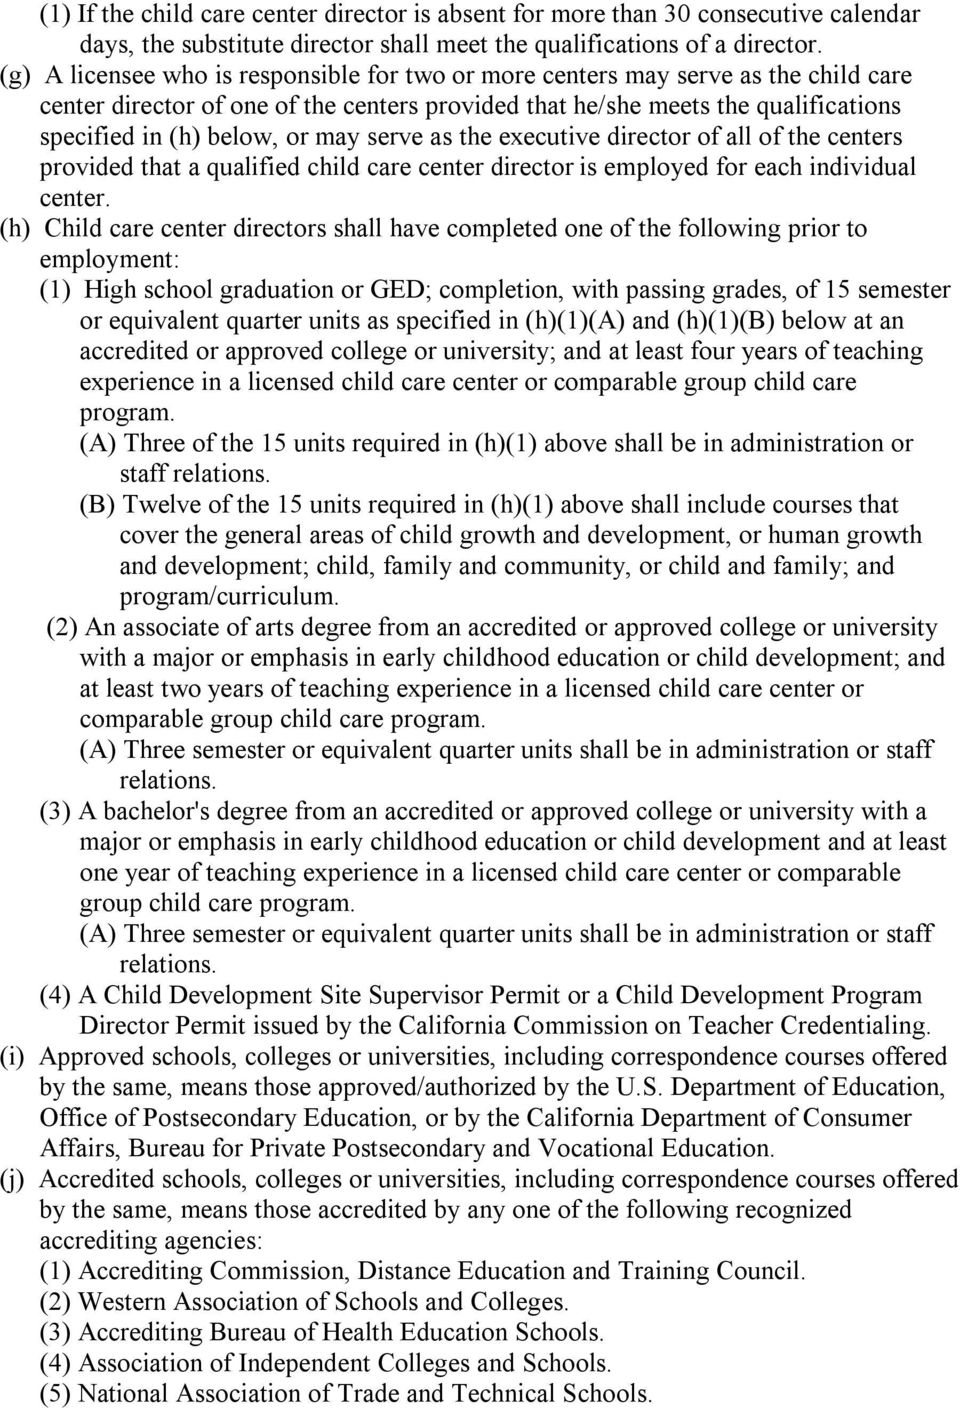 may serve as the executive director of all of the centers provided that a qualified child care center director is employed for each individual center.